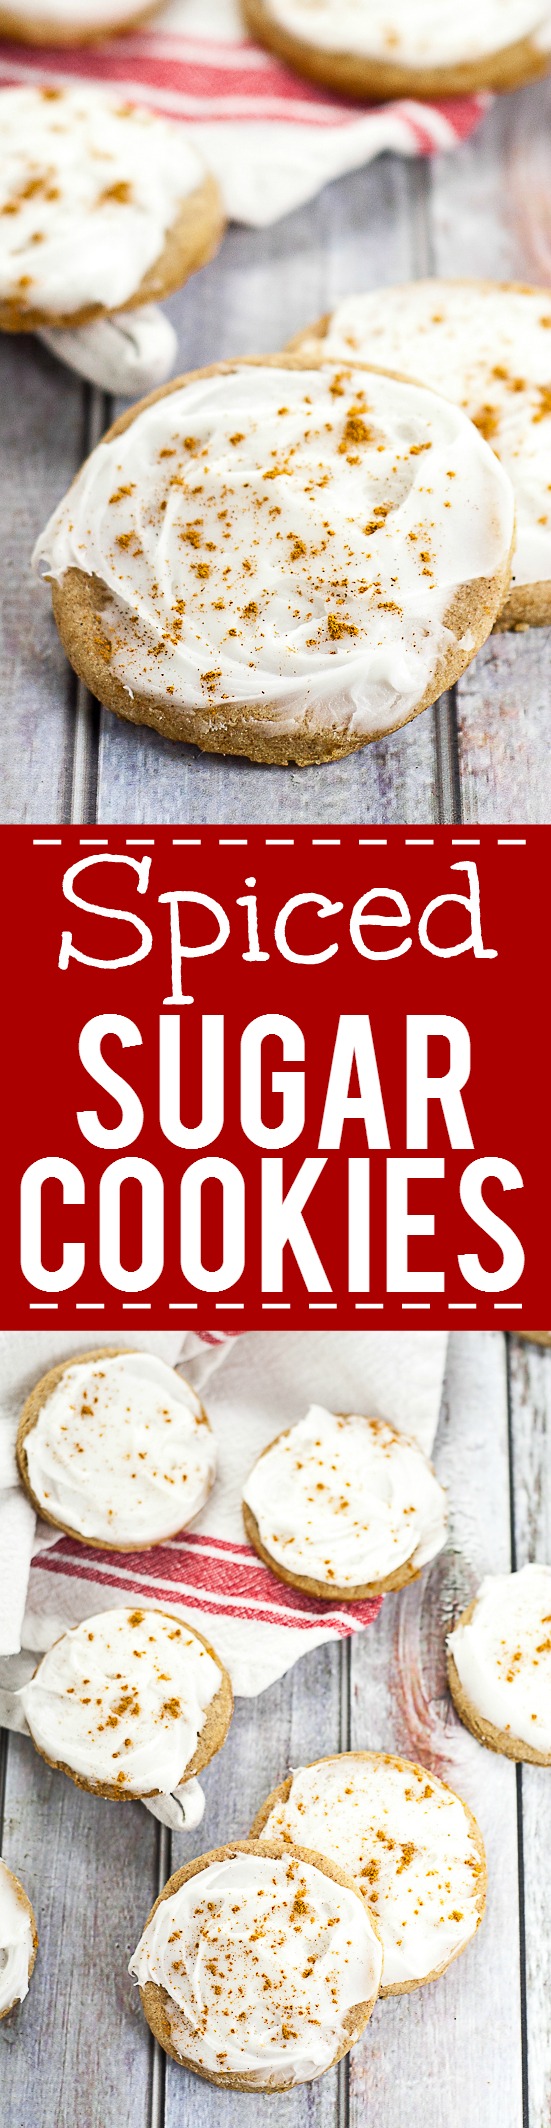 Spiced Sugar Cookies Recipe - Spiced Sugar Cookies recipe take your traditional sugar cookies and make them amazing with spicy cinnamon and nutmeg, topped with a creamy frosting and a sprinkle of cinnamon! These make such easy and yummy Christmas cookies! Perfect for a Christmas cookie exchange!